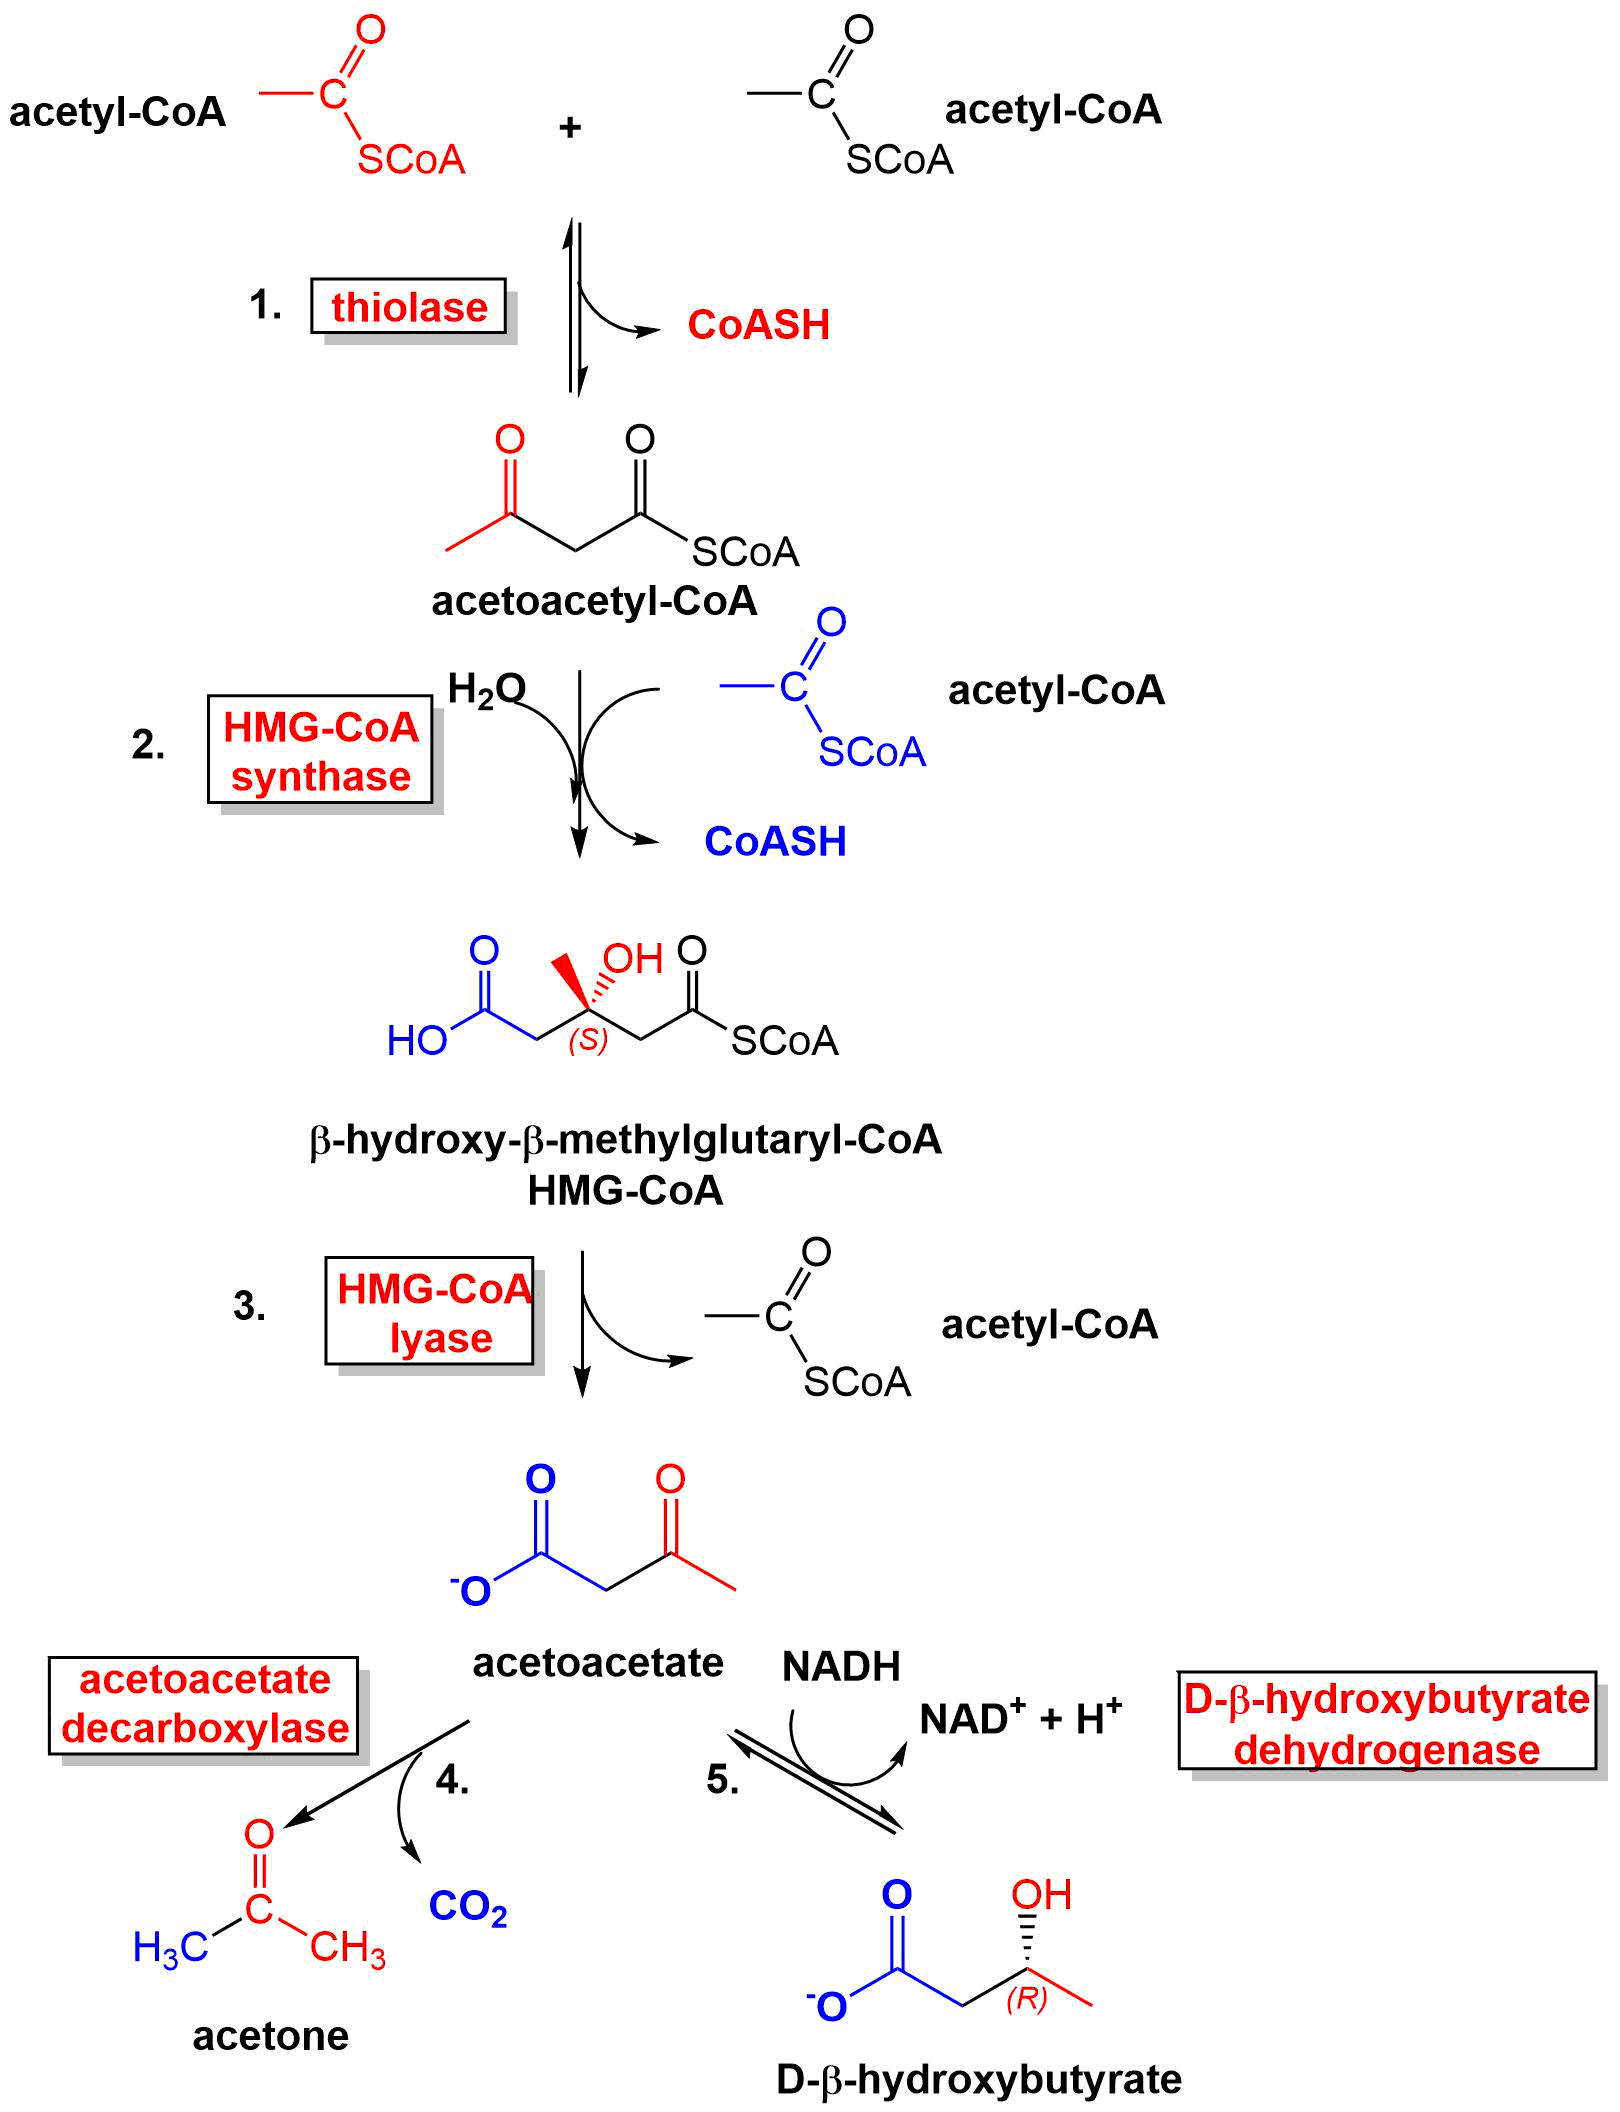 ketone bodies of synthesis